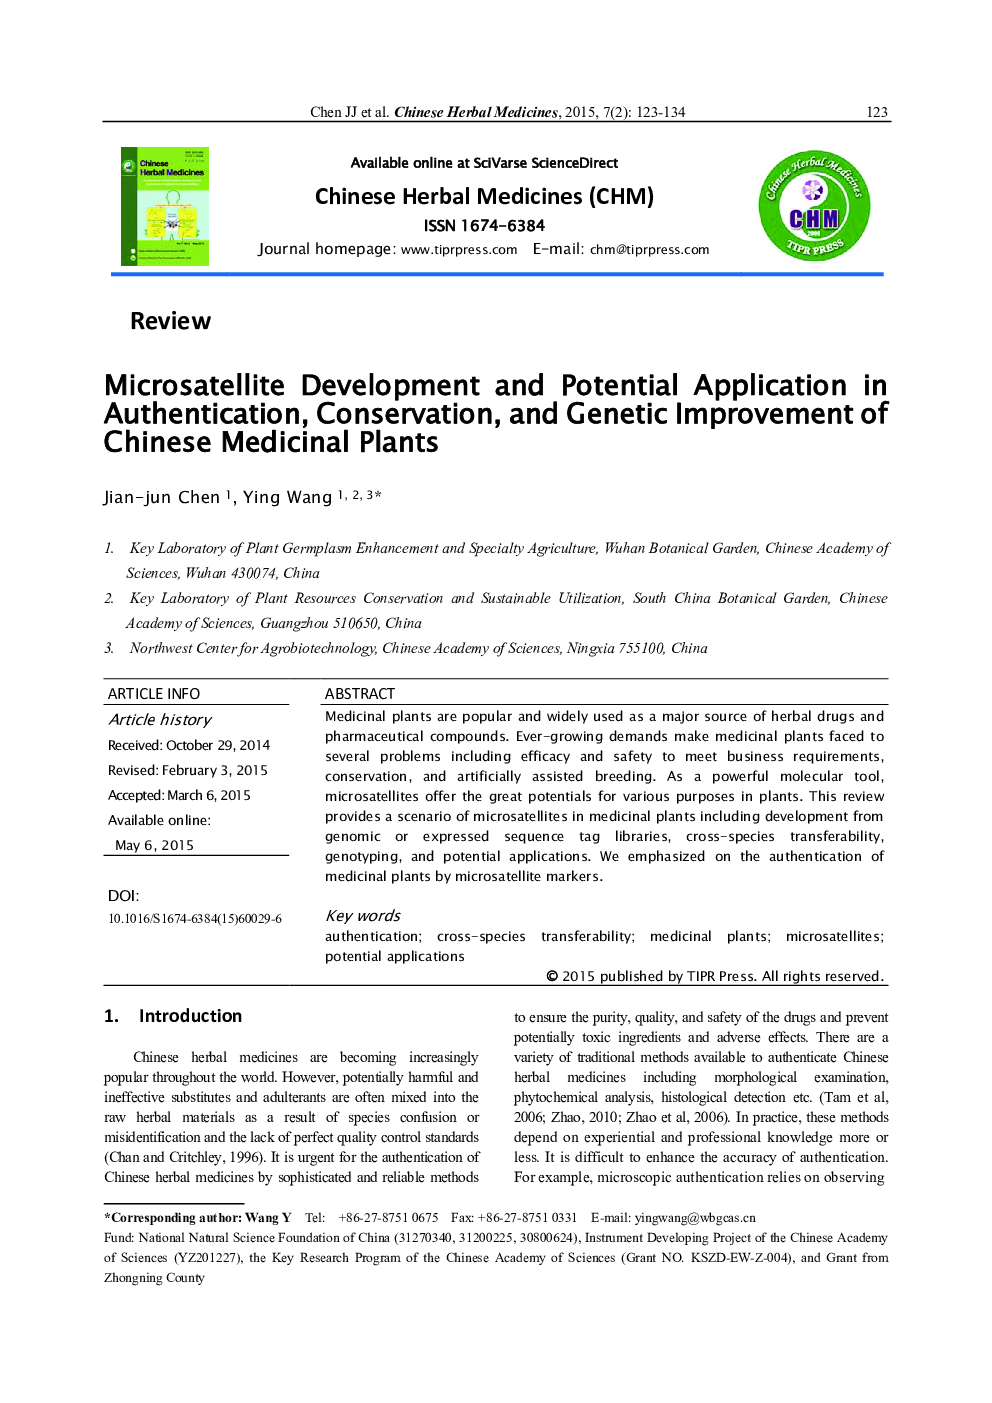 Microsatellite Development and Potential Application in Authentication, Conservation, and Genetic Improvement of Chinese Medicinal Plants 